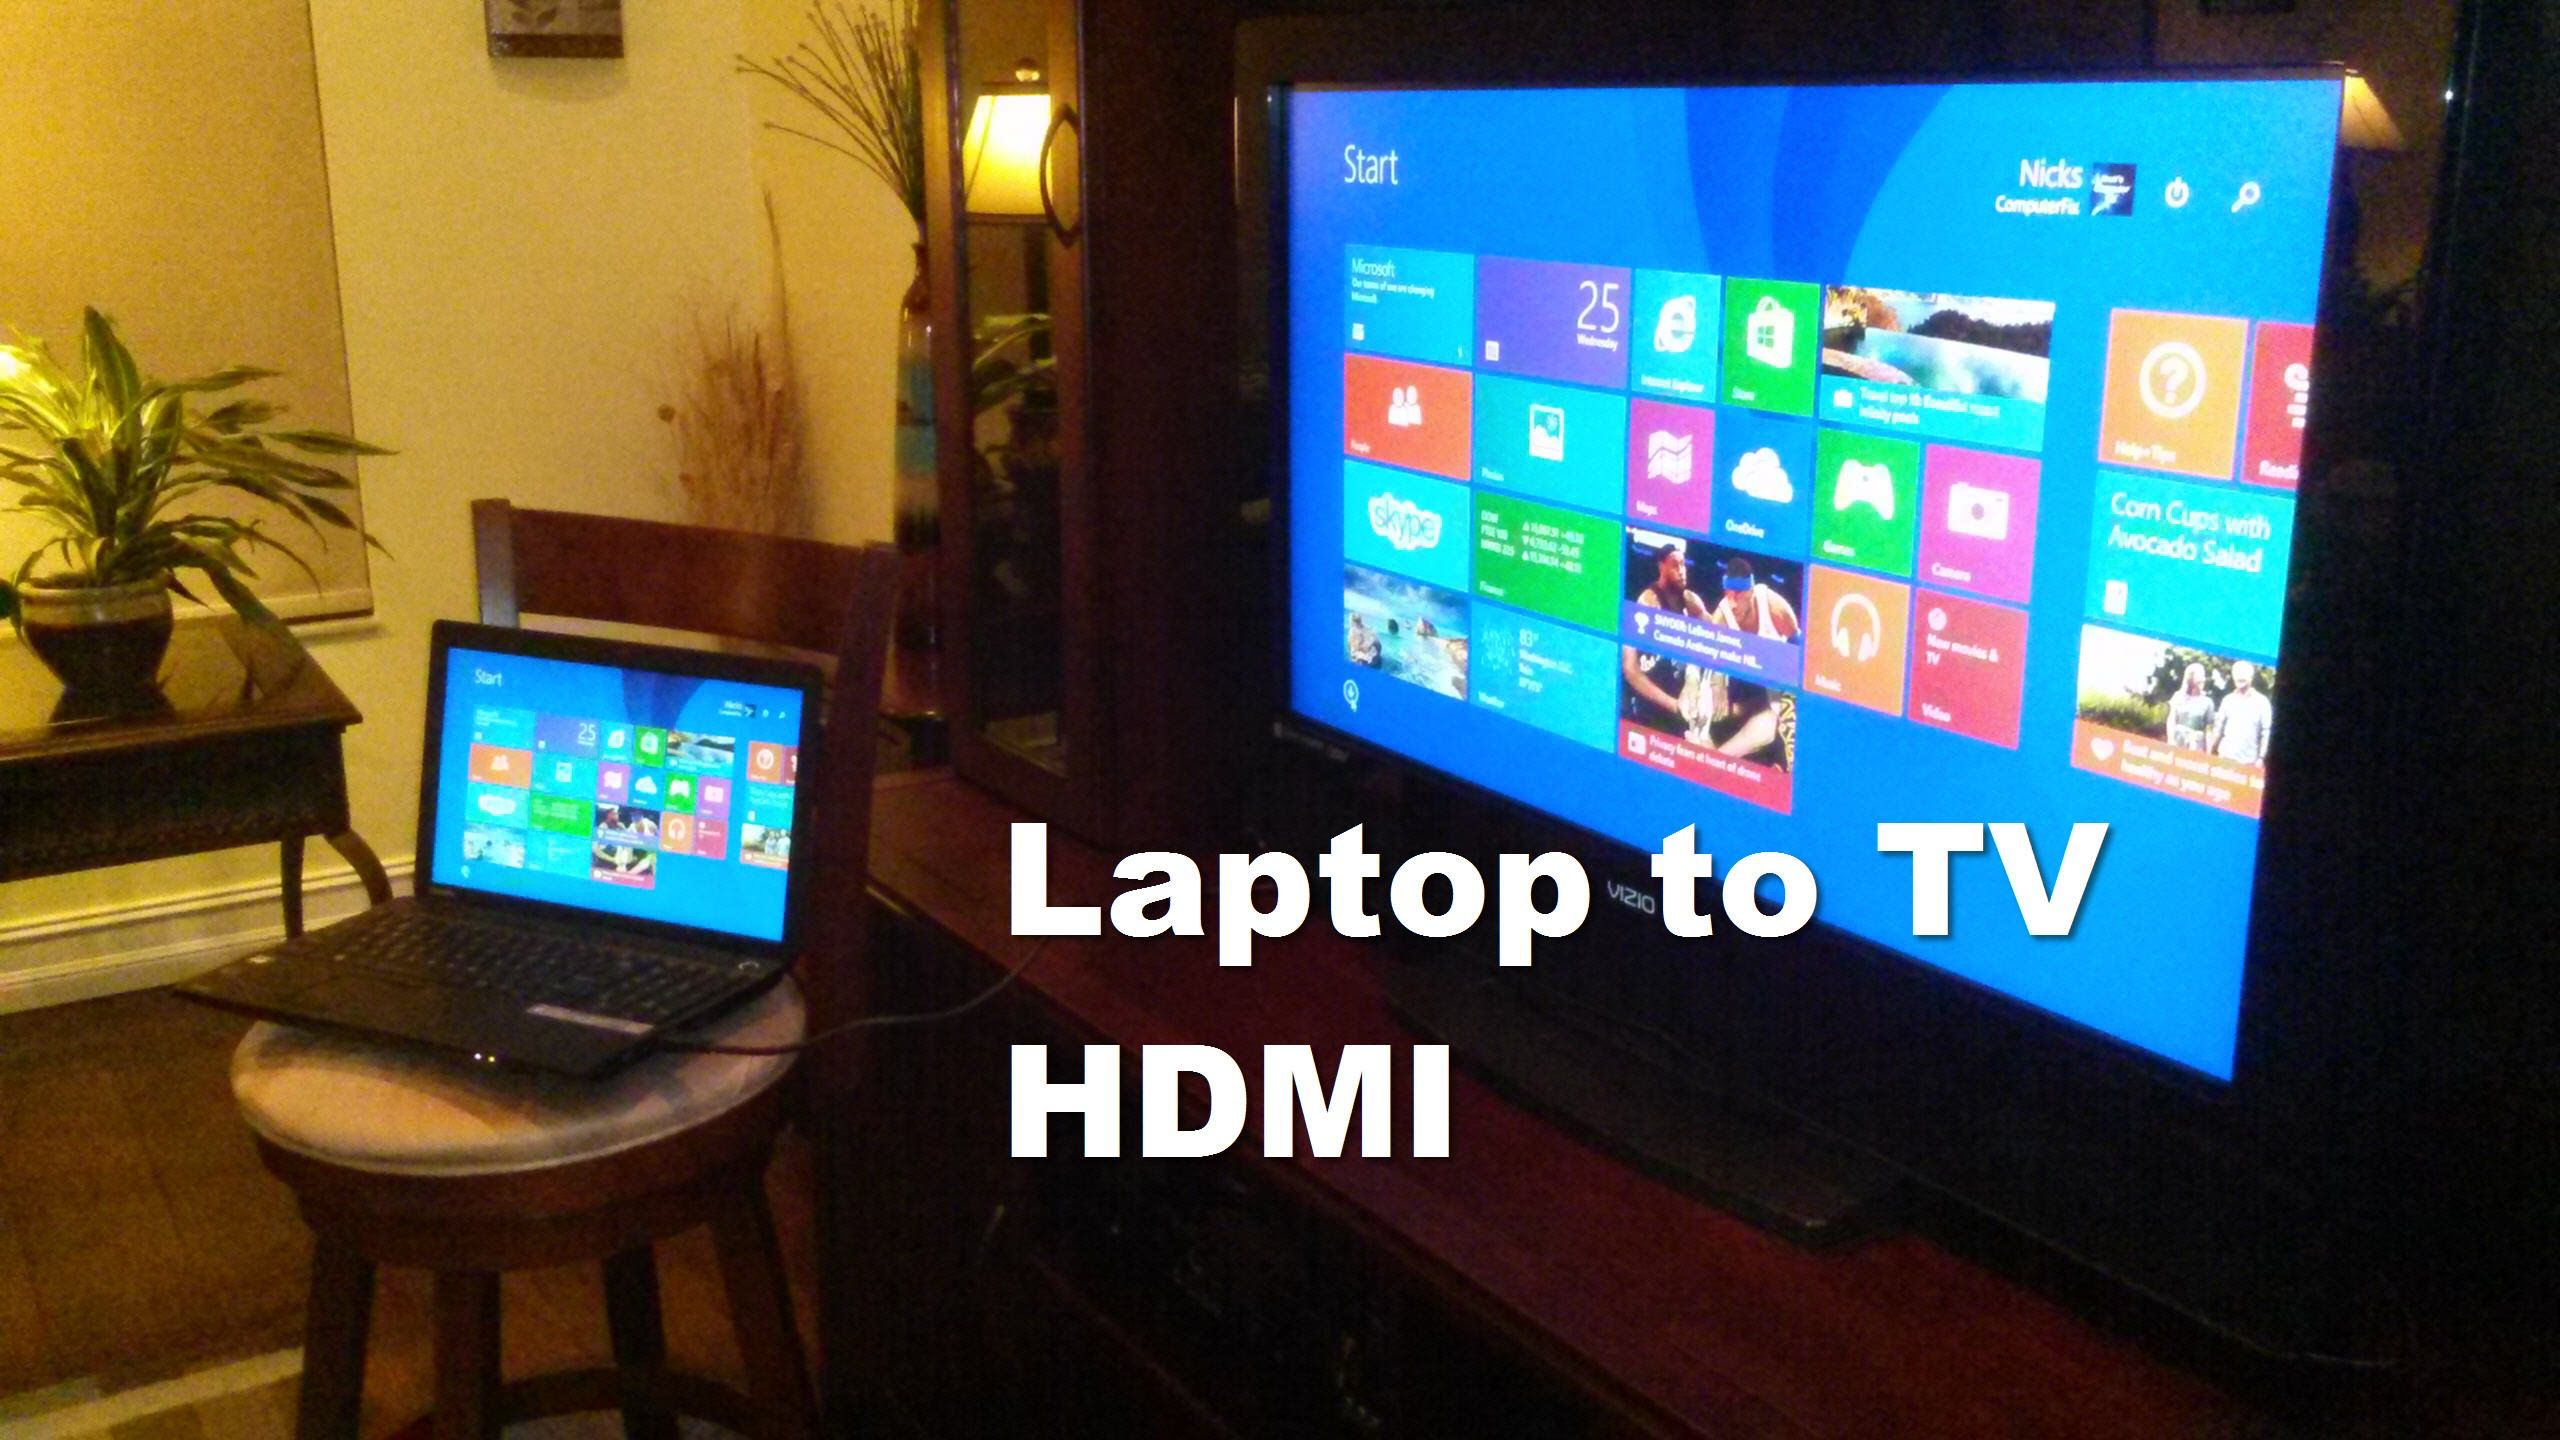 This video shows how to connect Laptop to HDMI TV which ...